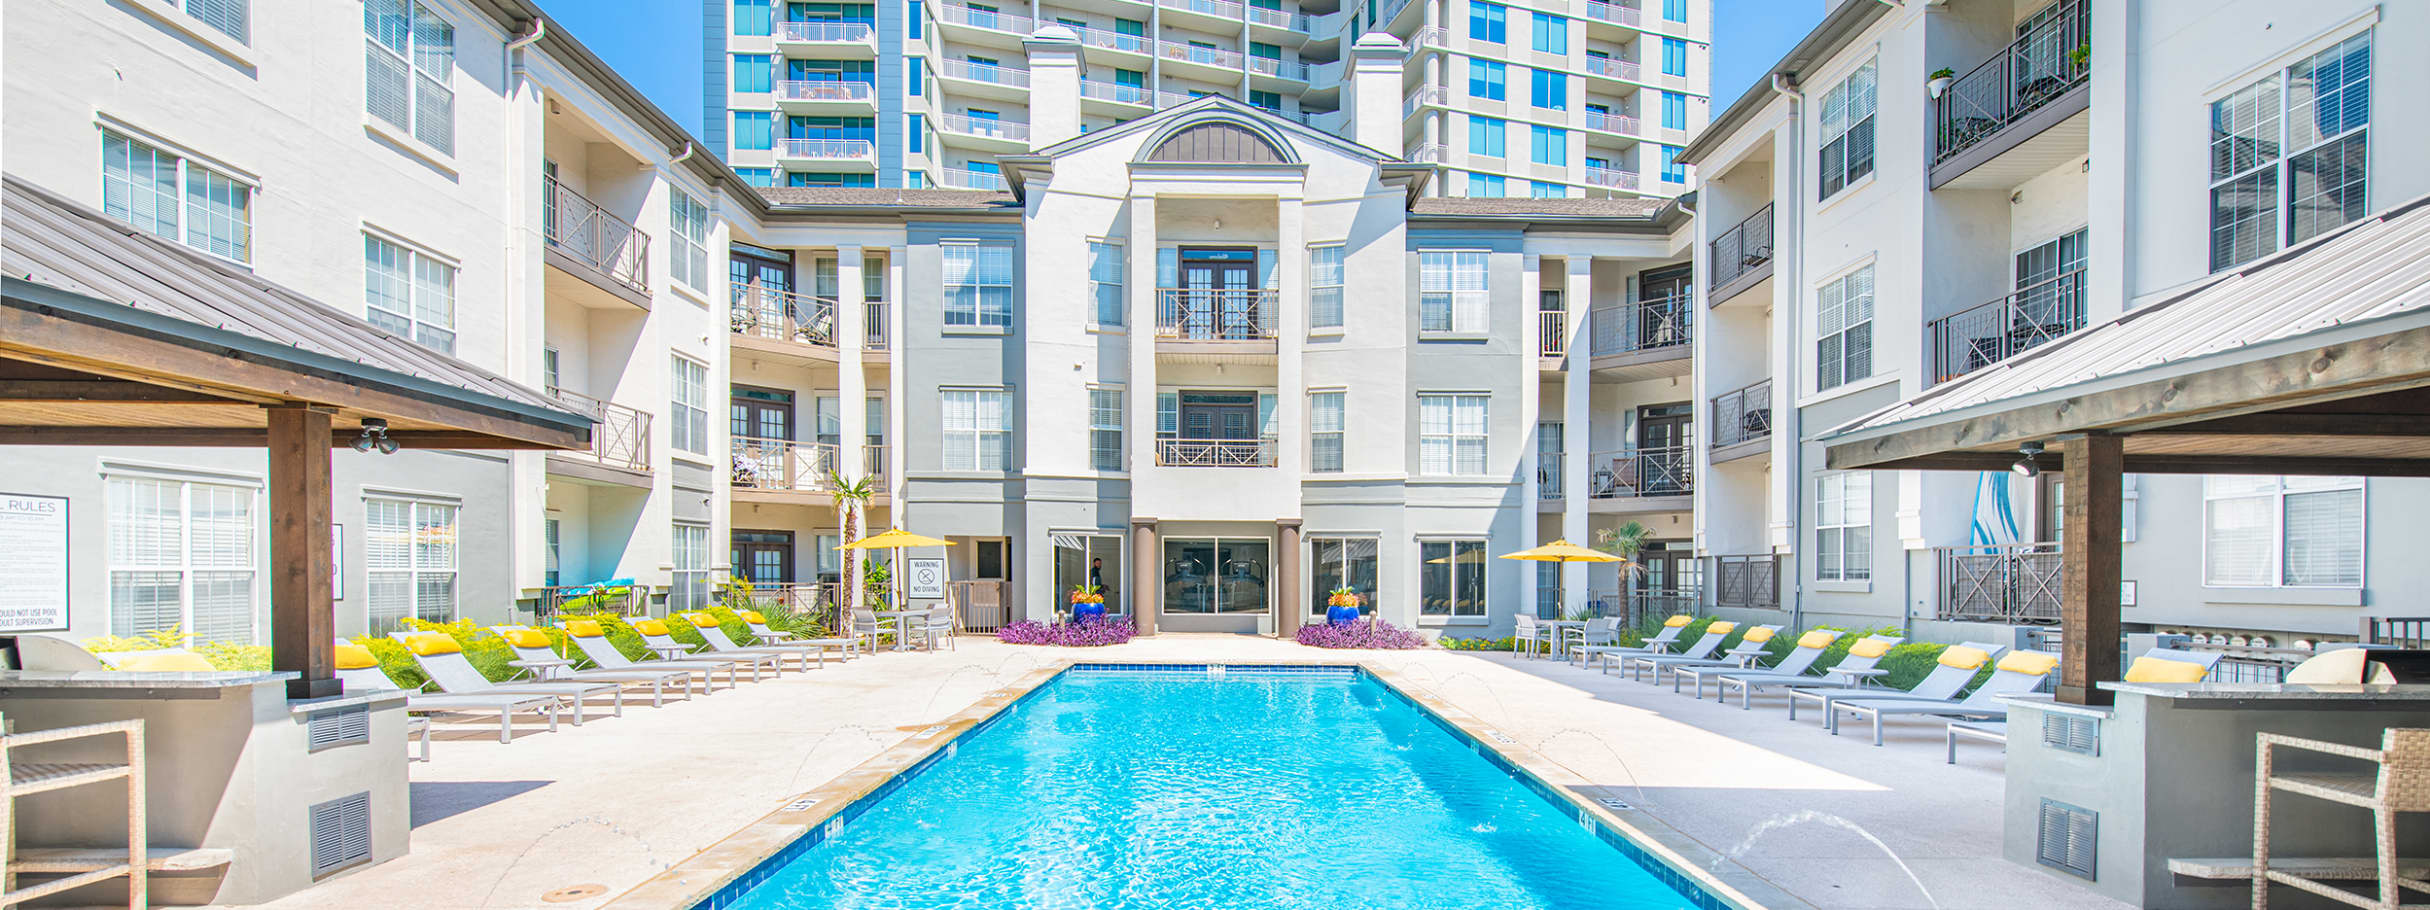 Pool at MAA McKinney Ave luxury apartment homes in Dallas, TX